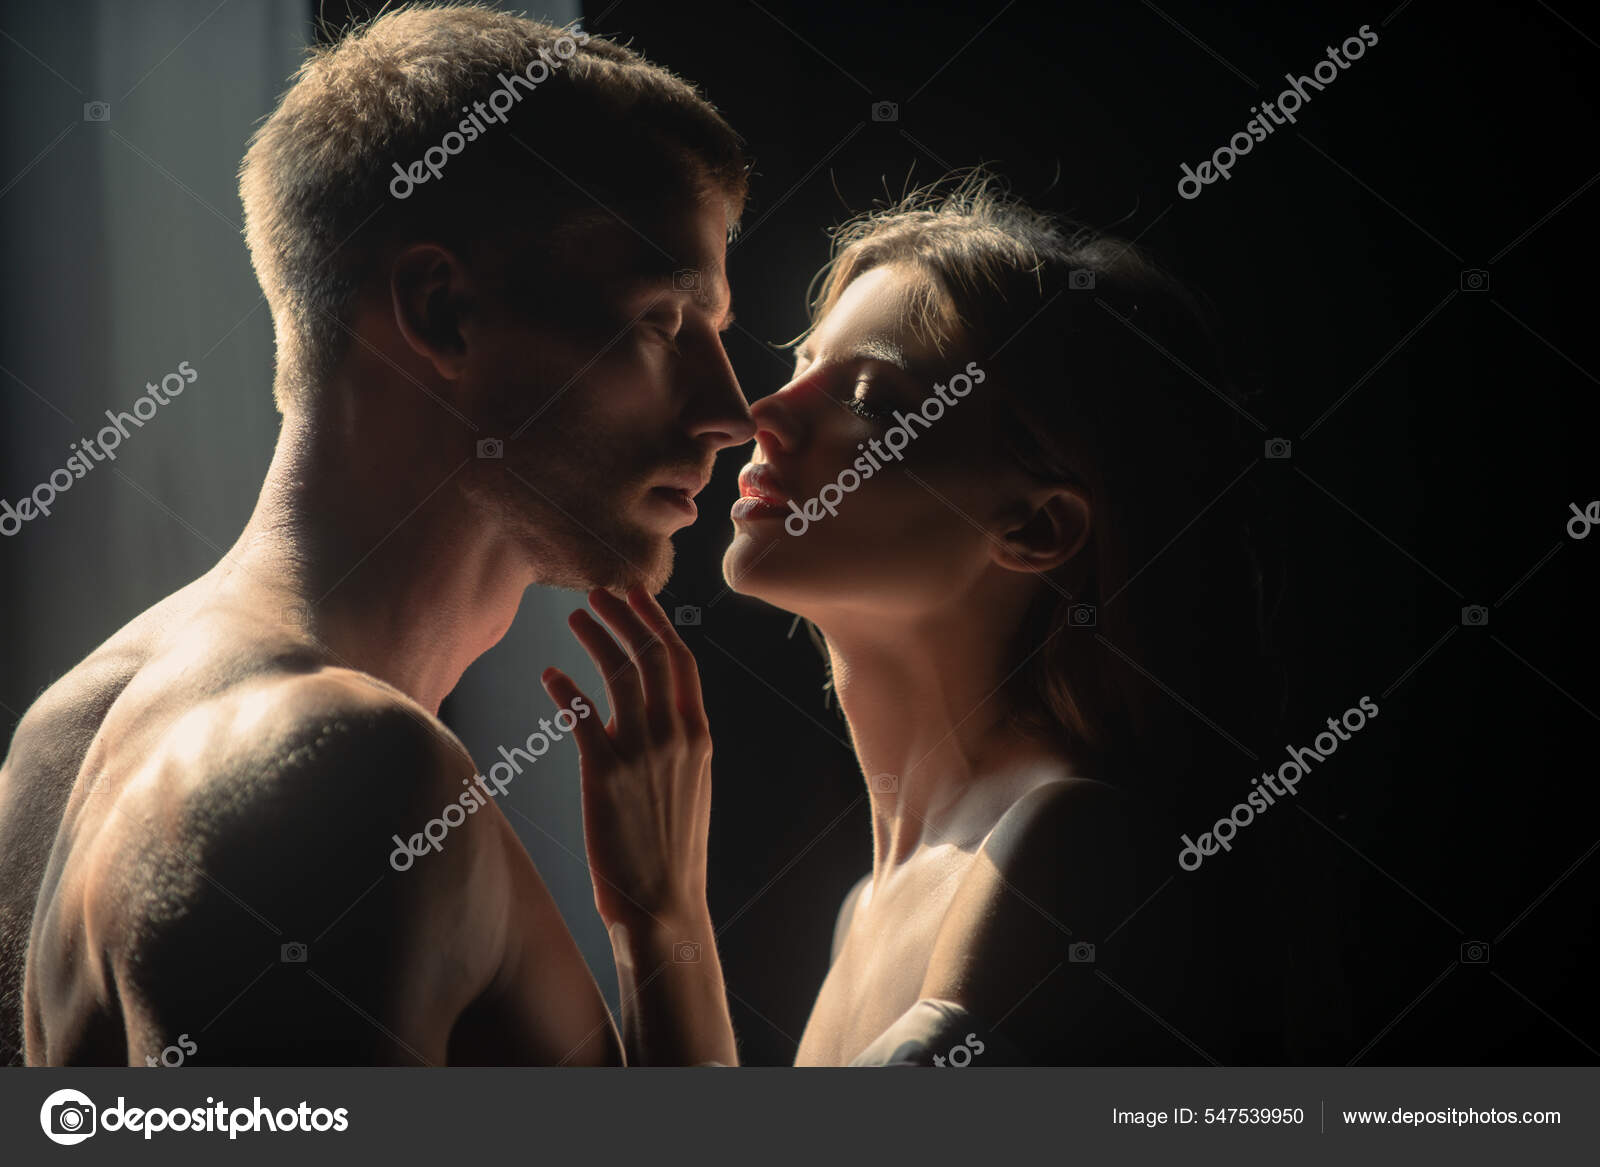 Beautiful loving couple posing on dark backgroung with night lights. Man embracing and going to kiss sensual woman